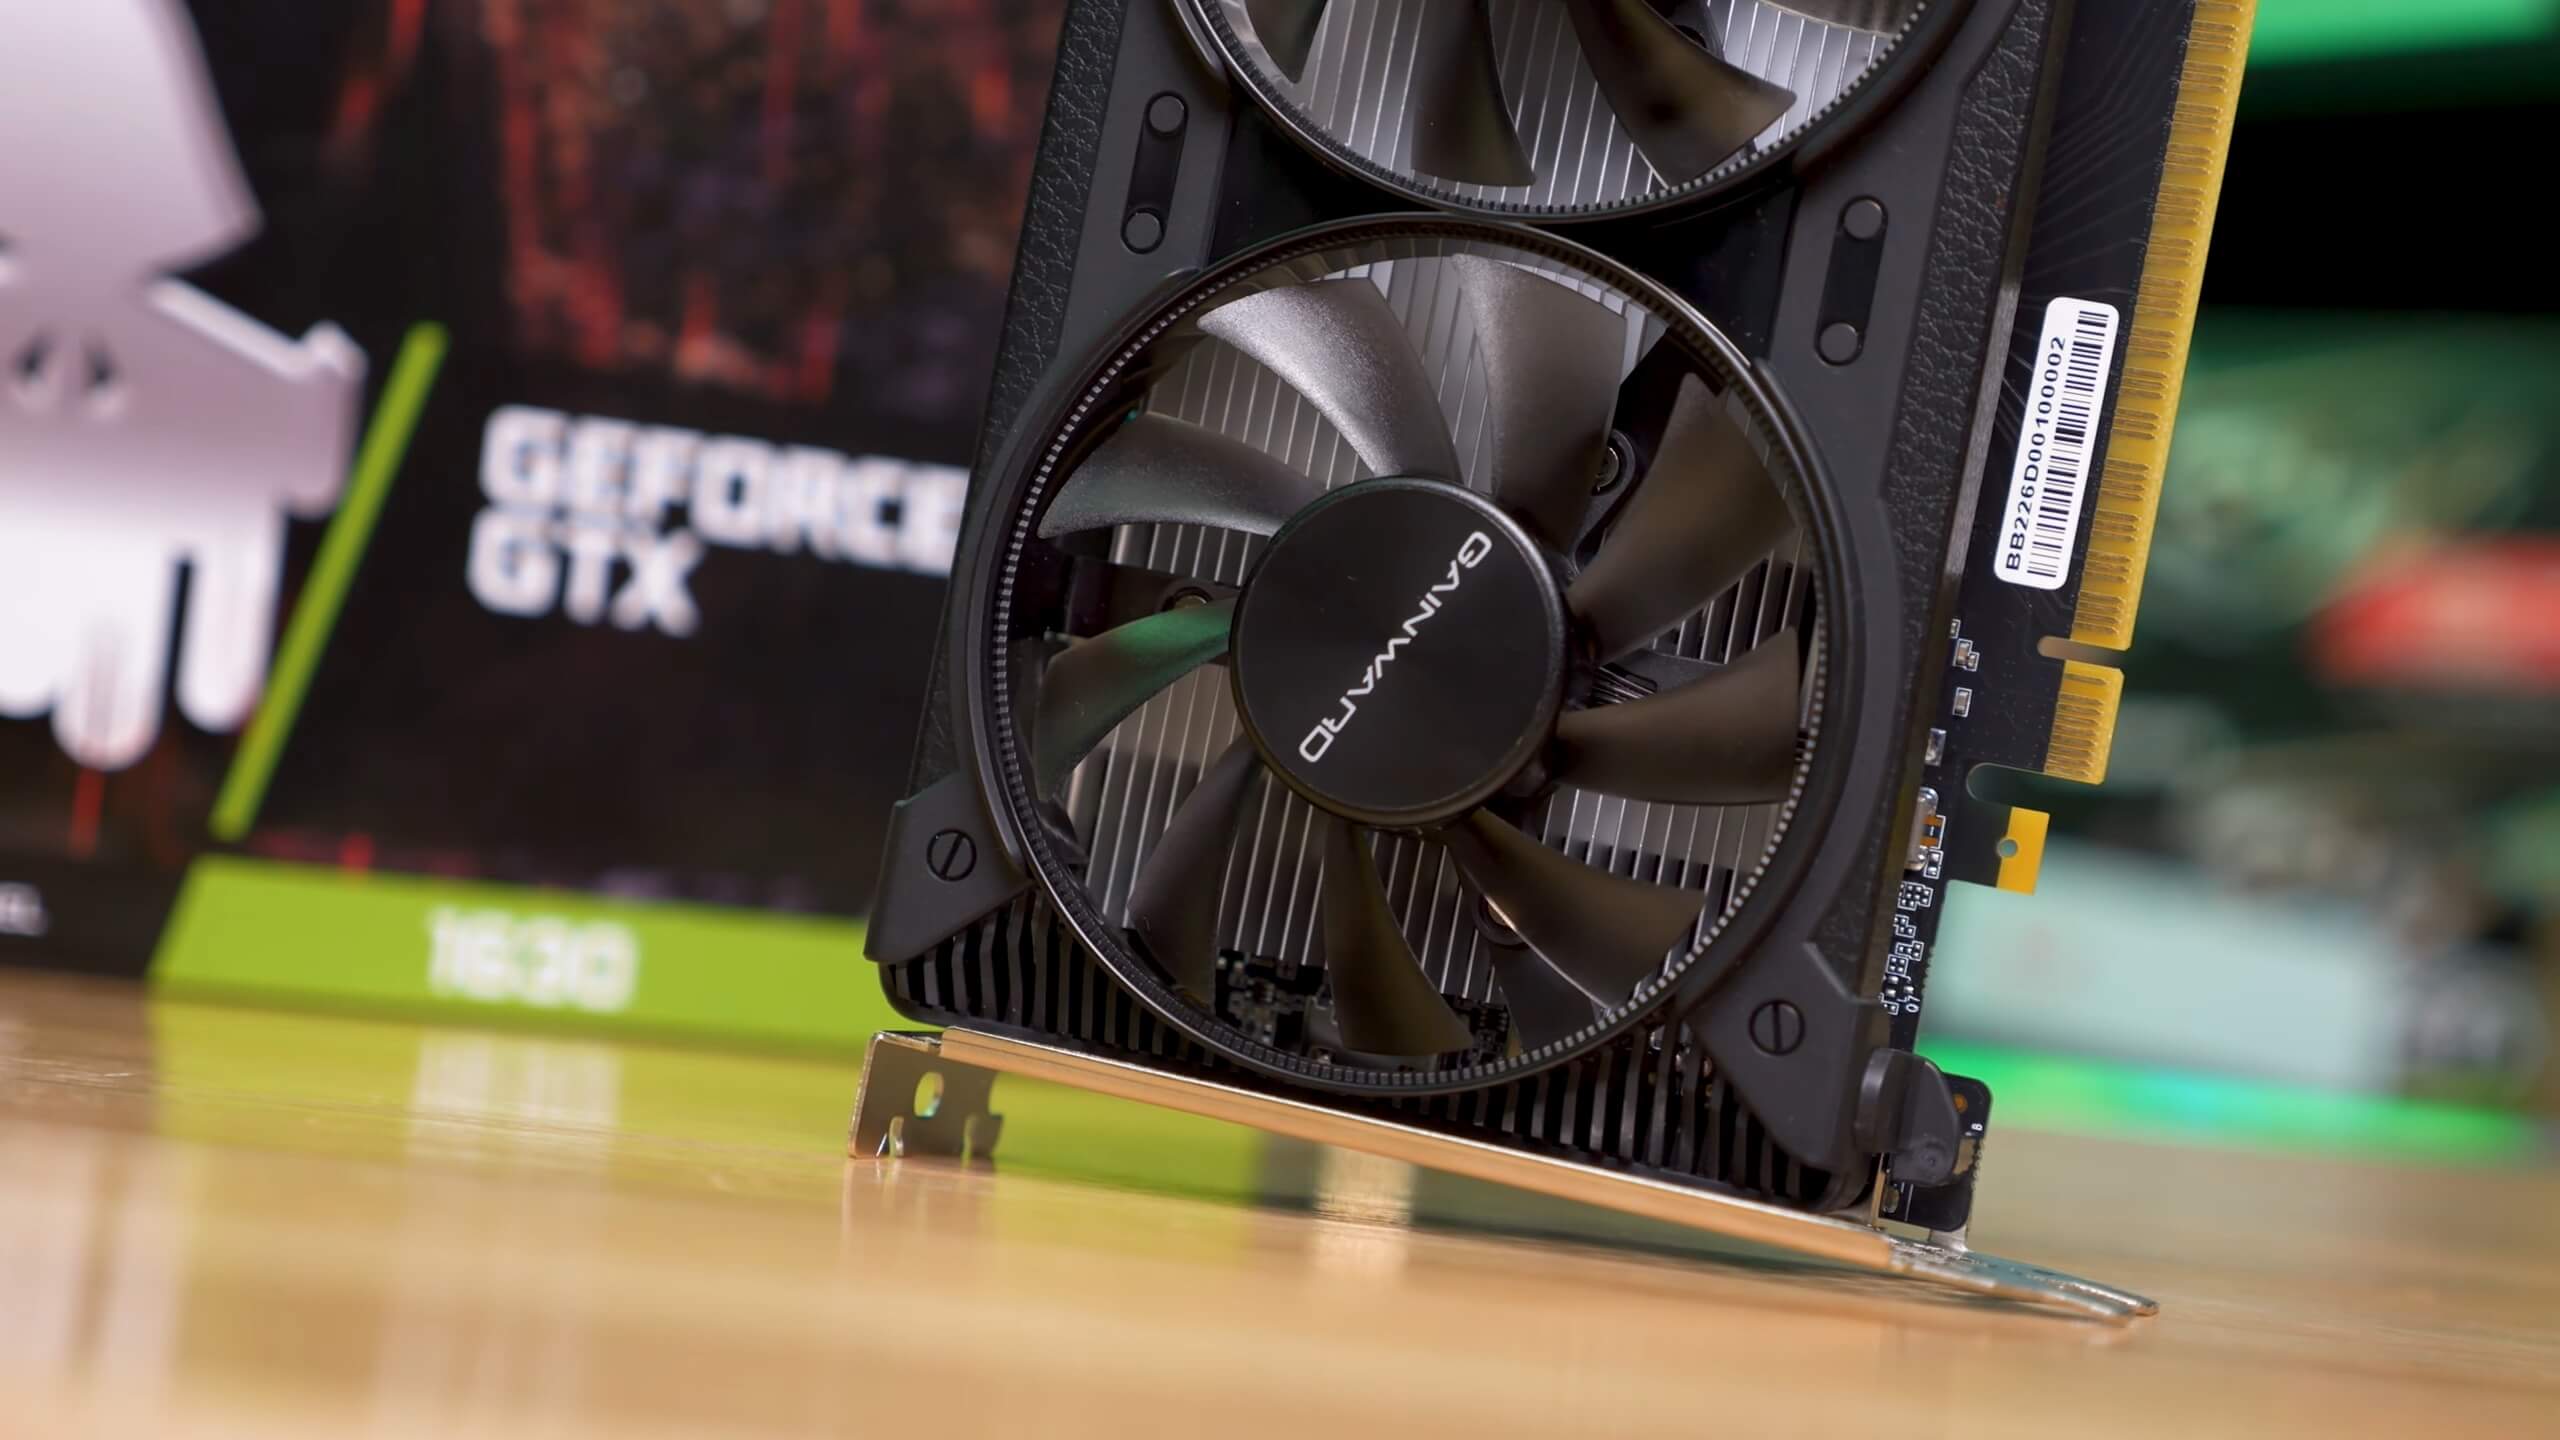 Nvidia GeForce GTX 1630 Review: An Insult to Gamers?